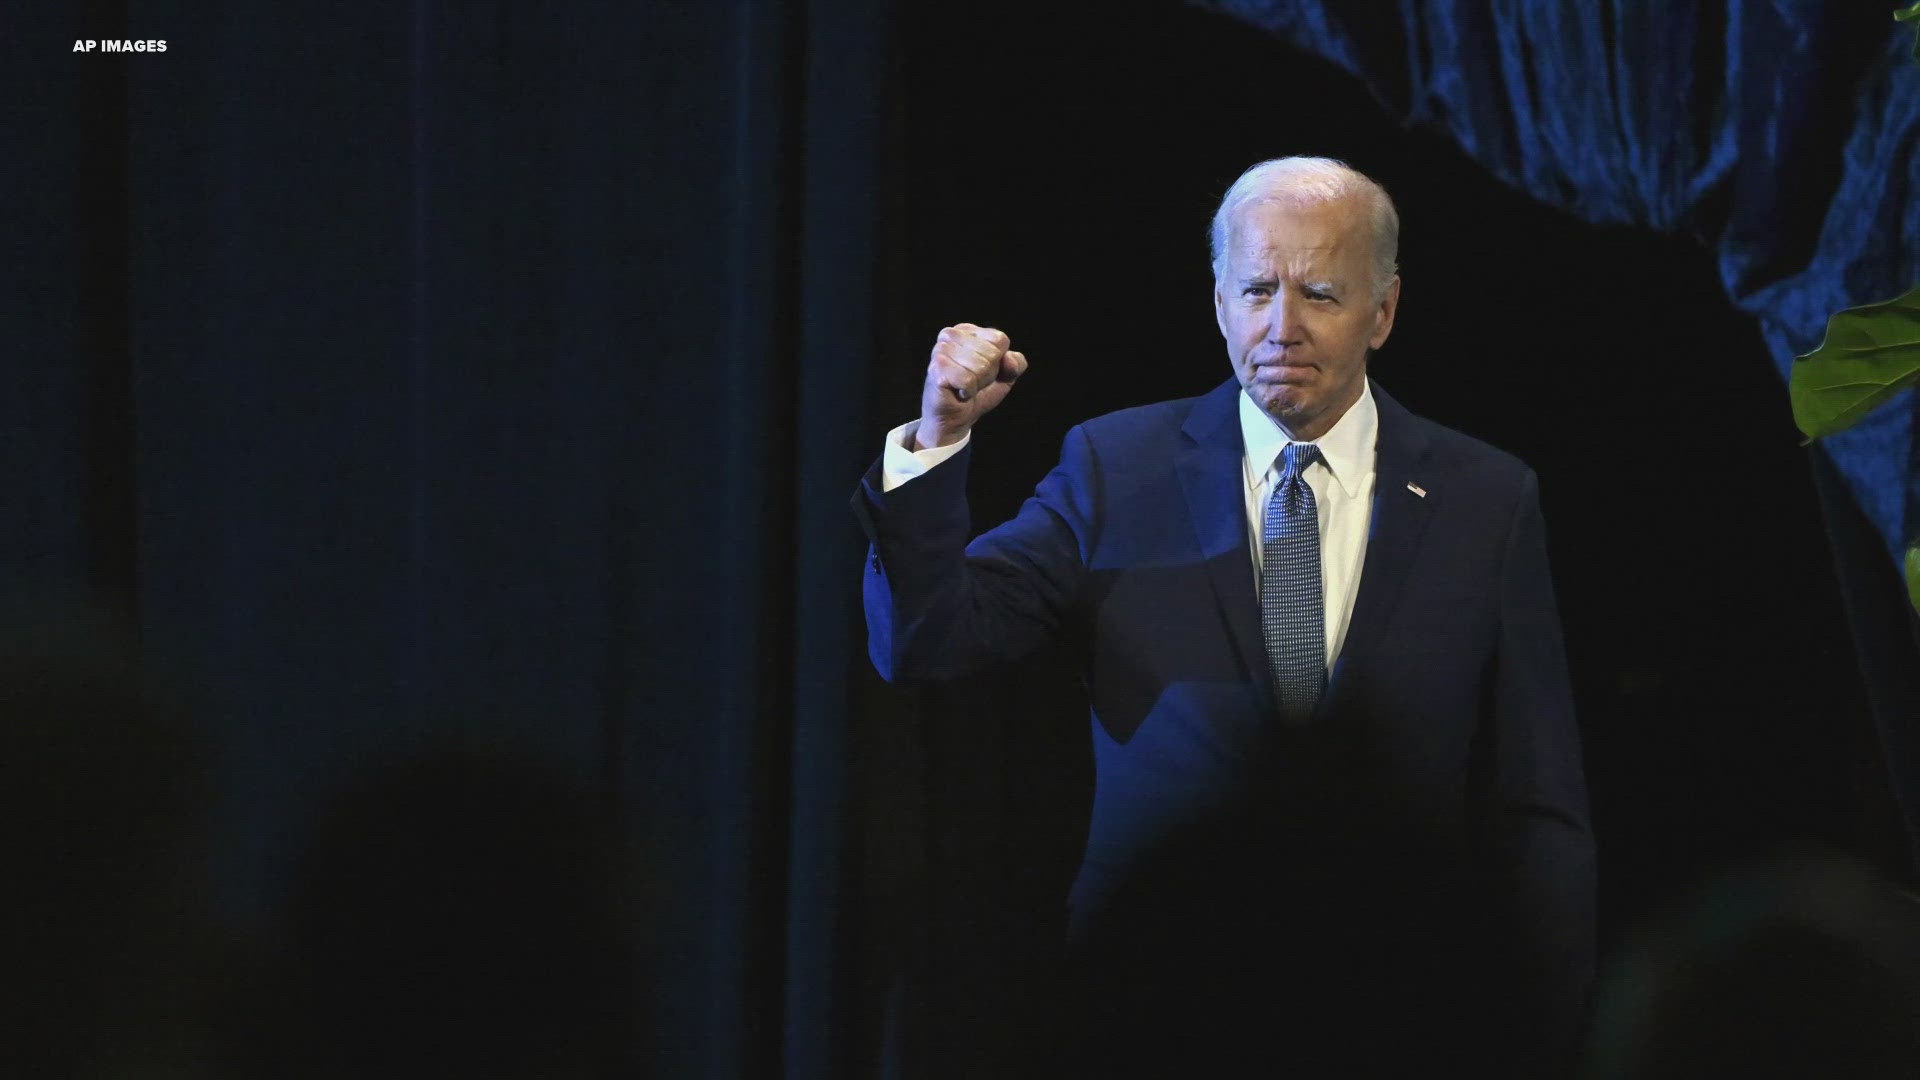 A few claims online suggest President Biden is stepping down or that he needs to. This is false.